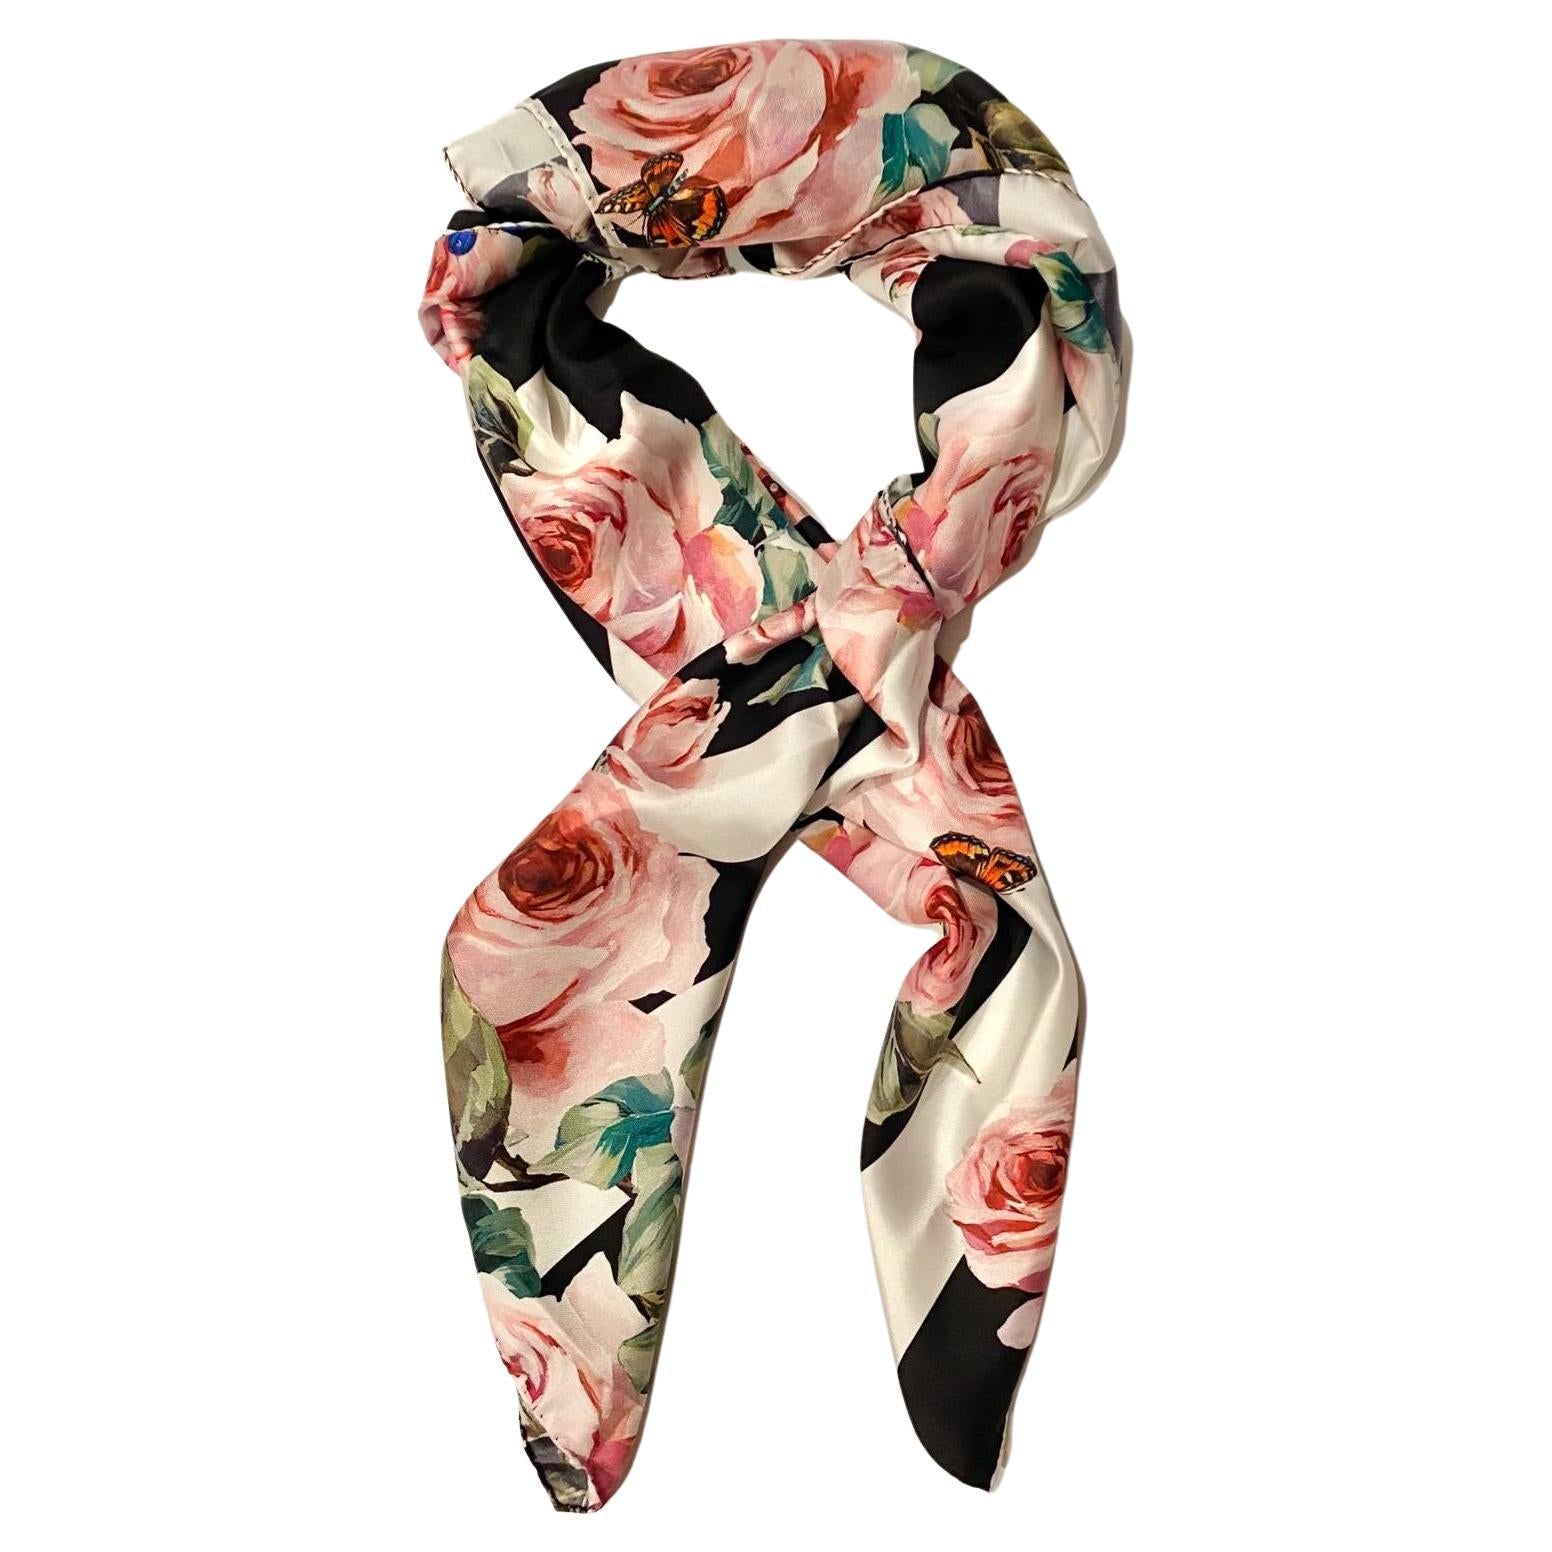 Dolce & Gabbana Large Twill Stripe Silk Scarf with Pink Rose Print - style - CHNGR